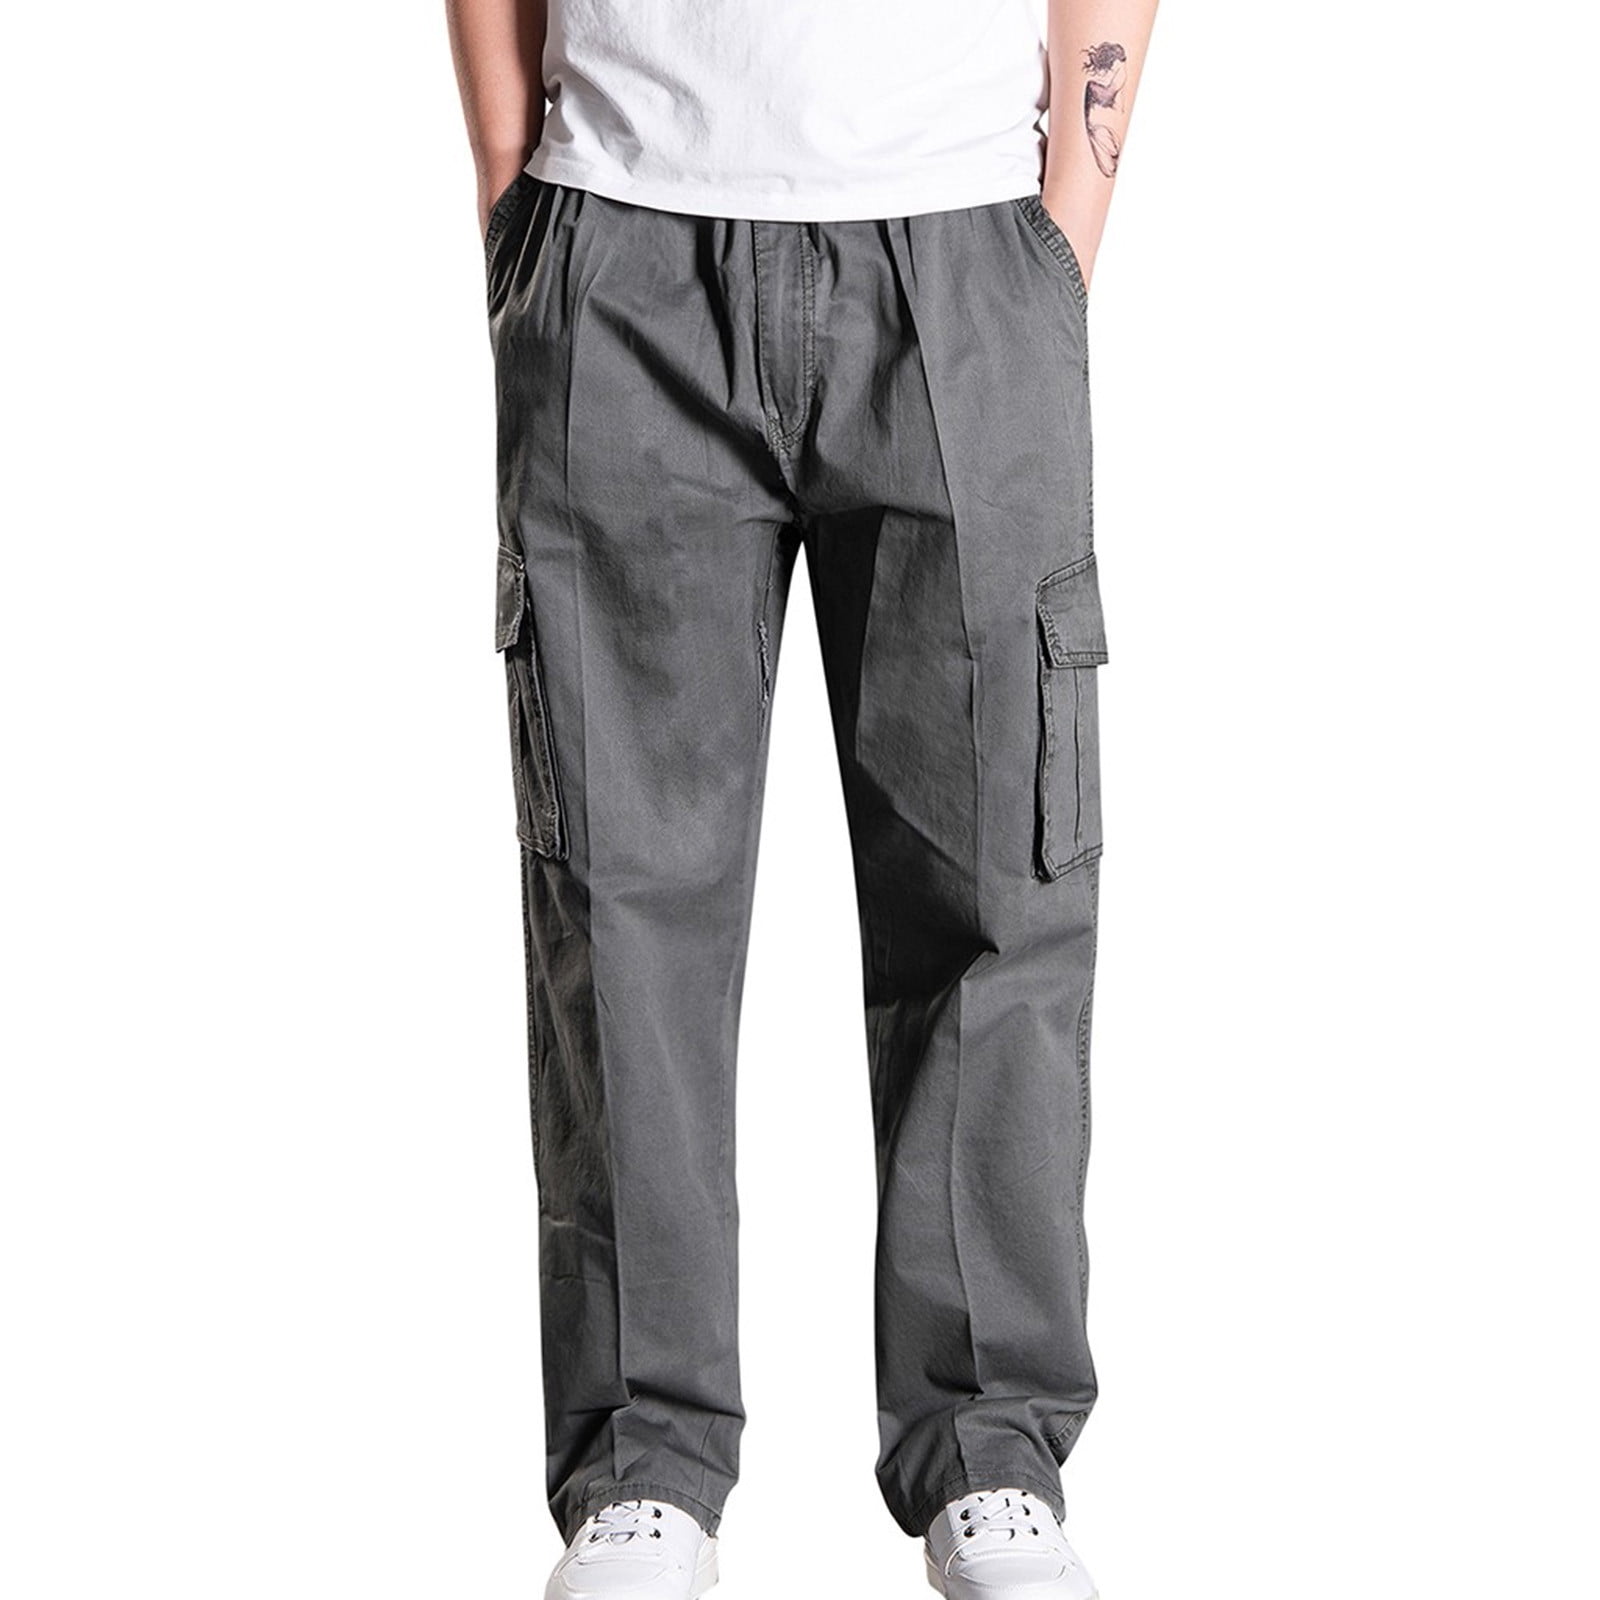 refulgence Mens Casual Sweatpants Loose Plus Size Outdoors Trousers Sports Overalls Long Pants